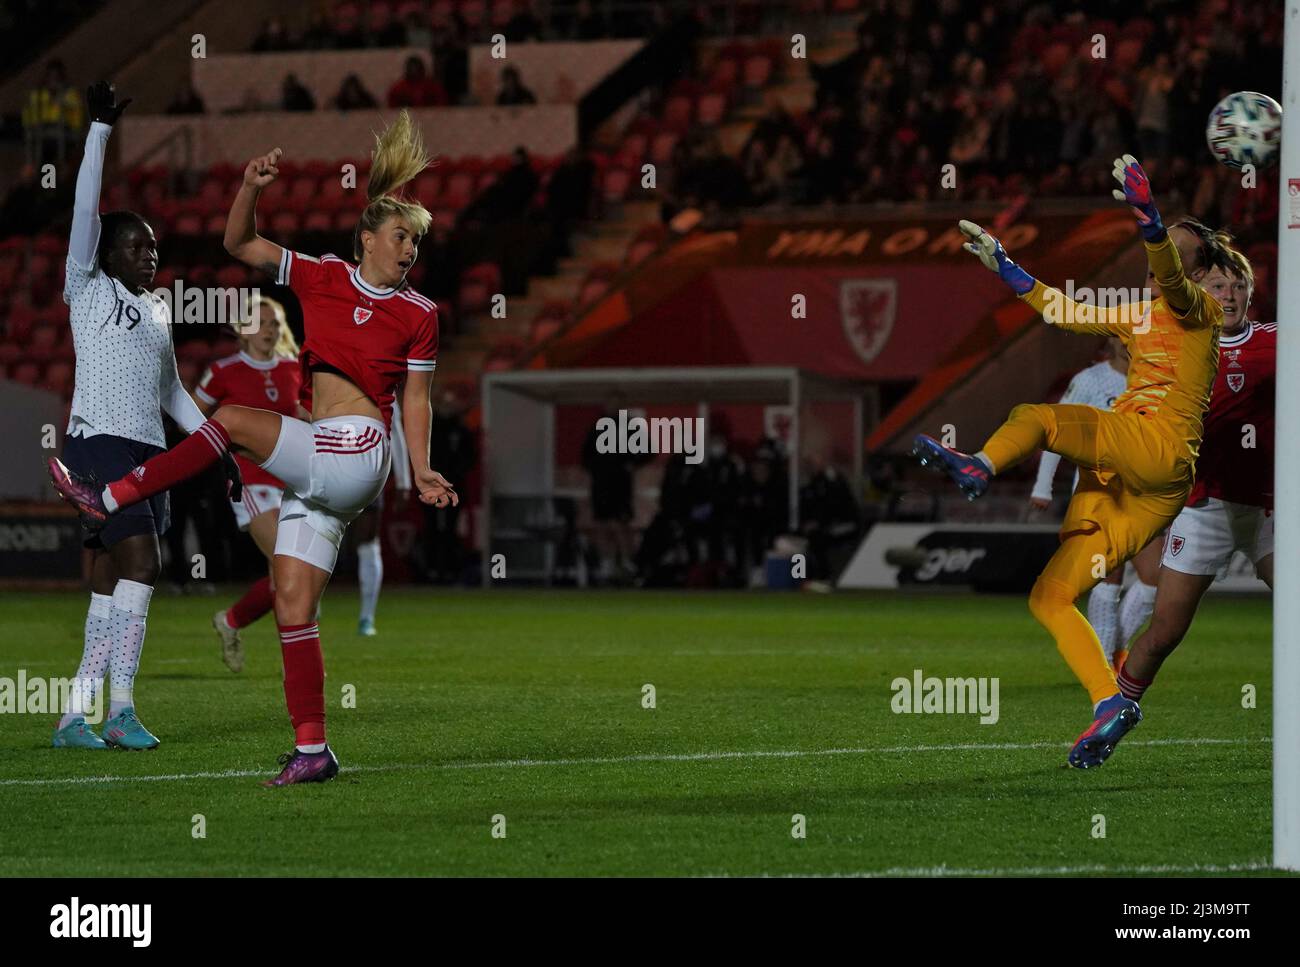 Parc y Scarlets, Llanelli, Wales. 8 Apr 2022. #3 Gemma Evans (Wales) sends the ball past goalkeeper Pauline Peyraud-Magnin (France) from an offside position. Credit: Penallta Photographics/Alamy Live News Stock Photo